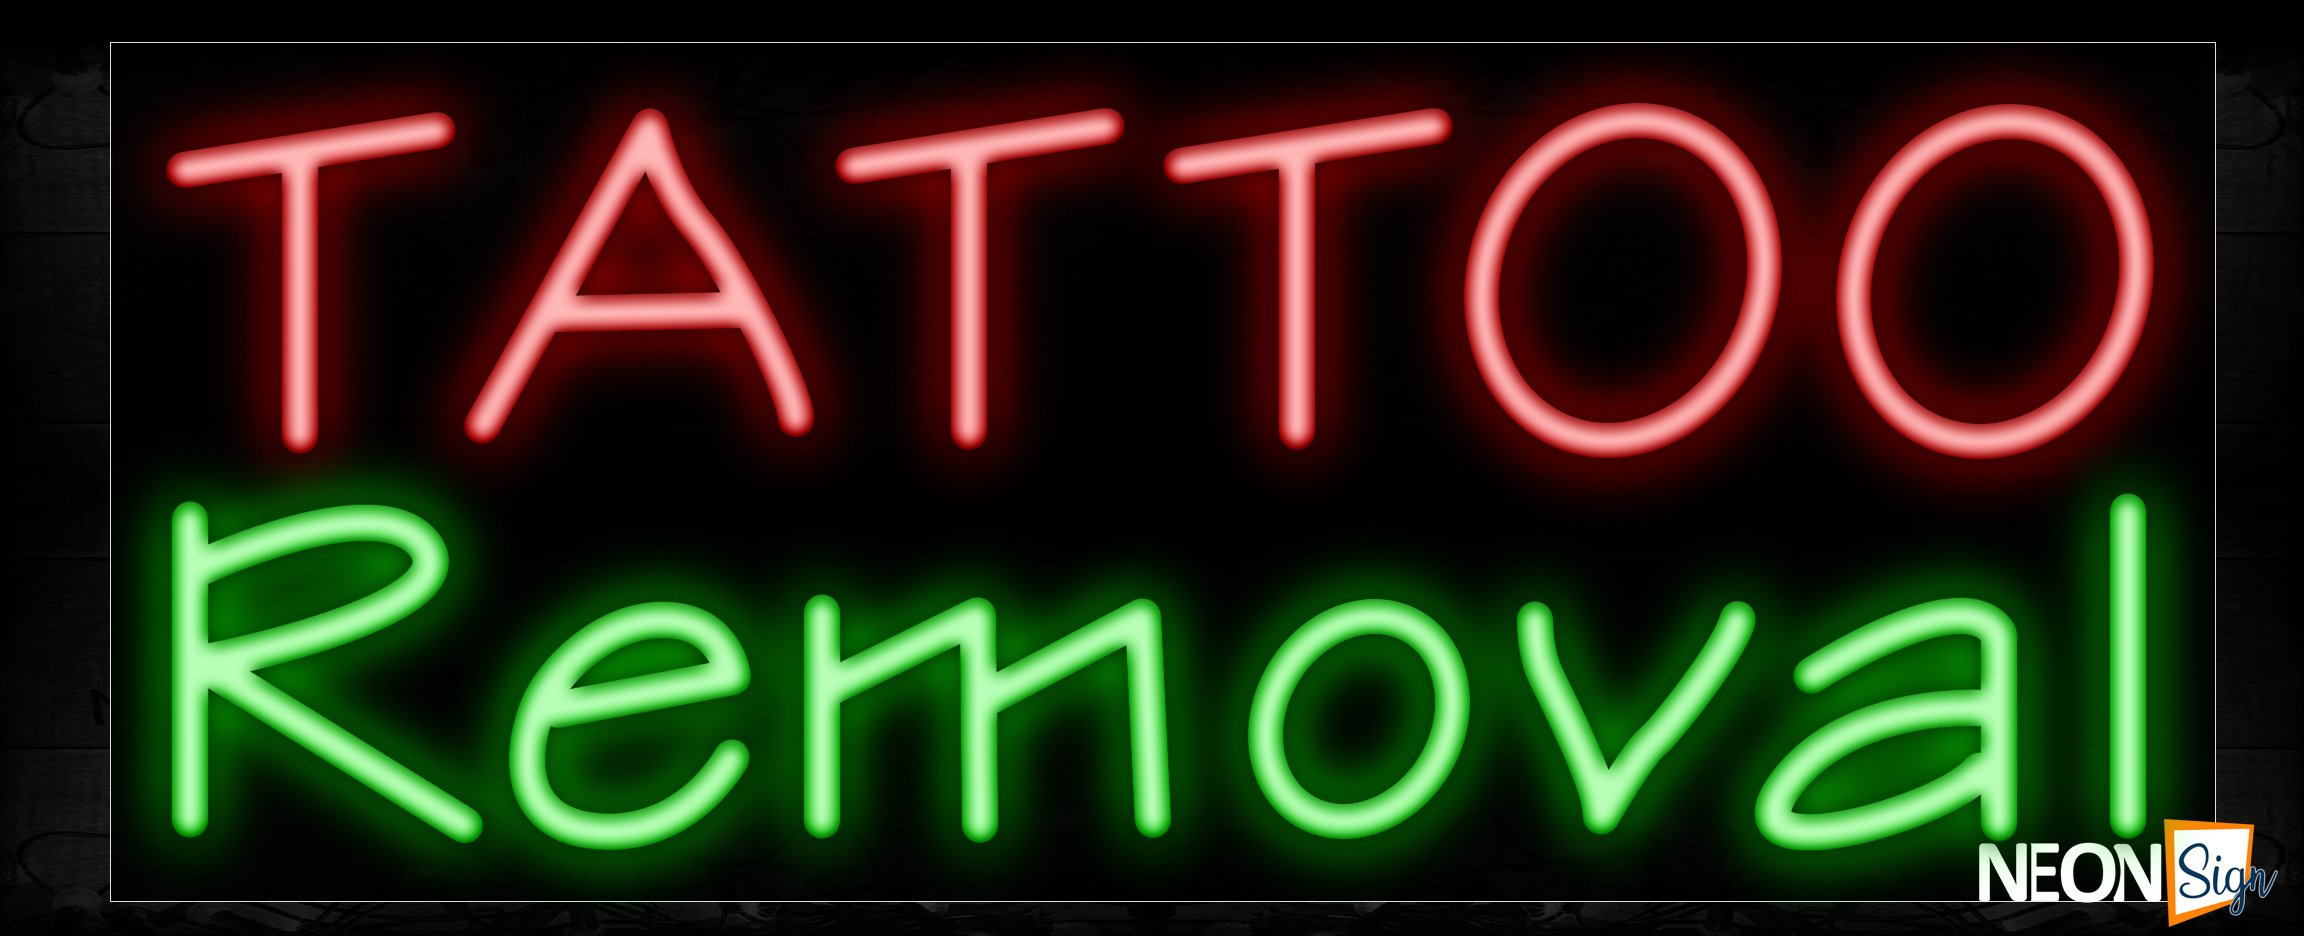 Image of Tattoo Removal Neon Sign